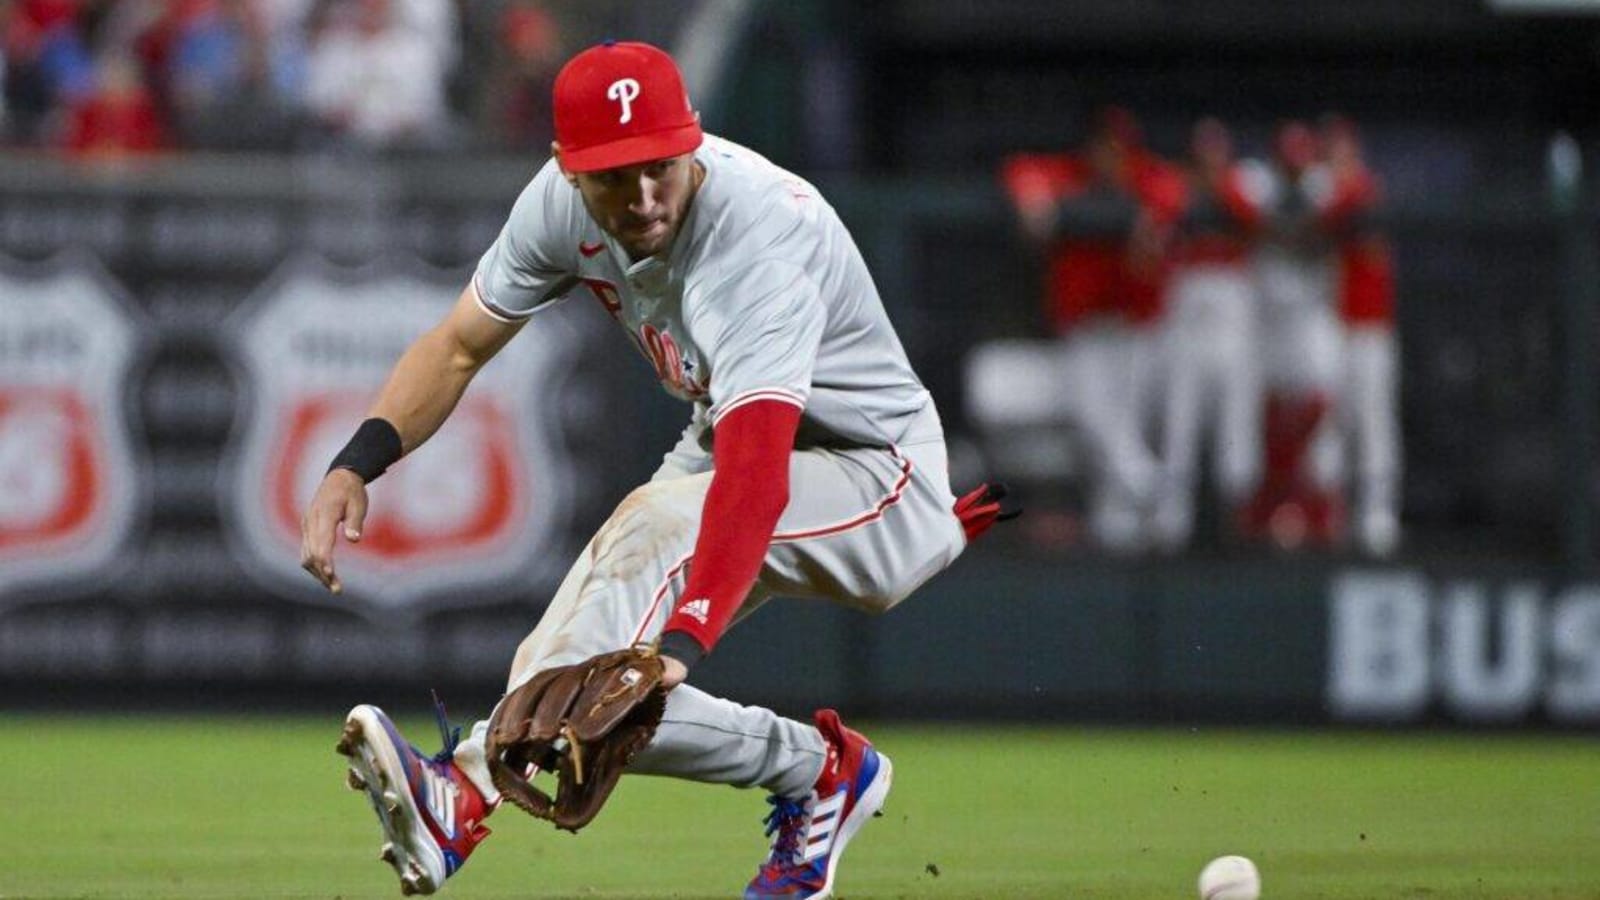 Phillies Most Dynamic Player Goes Through Agility Drills